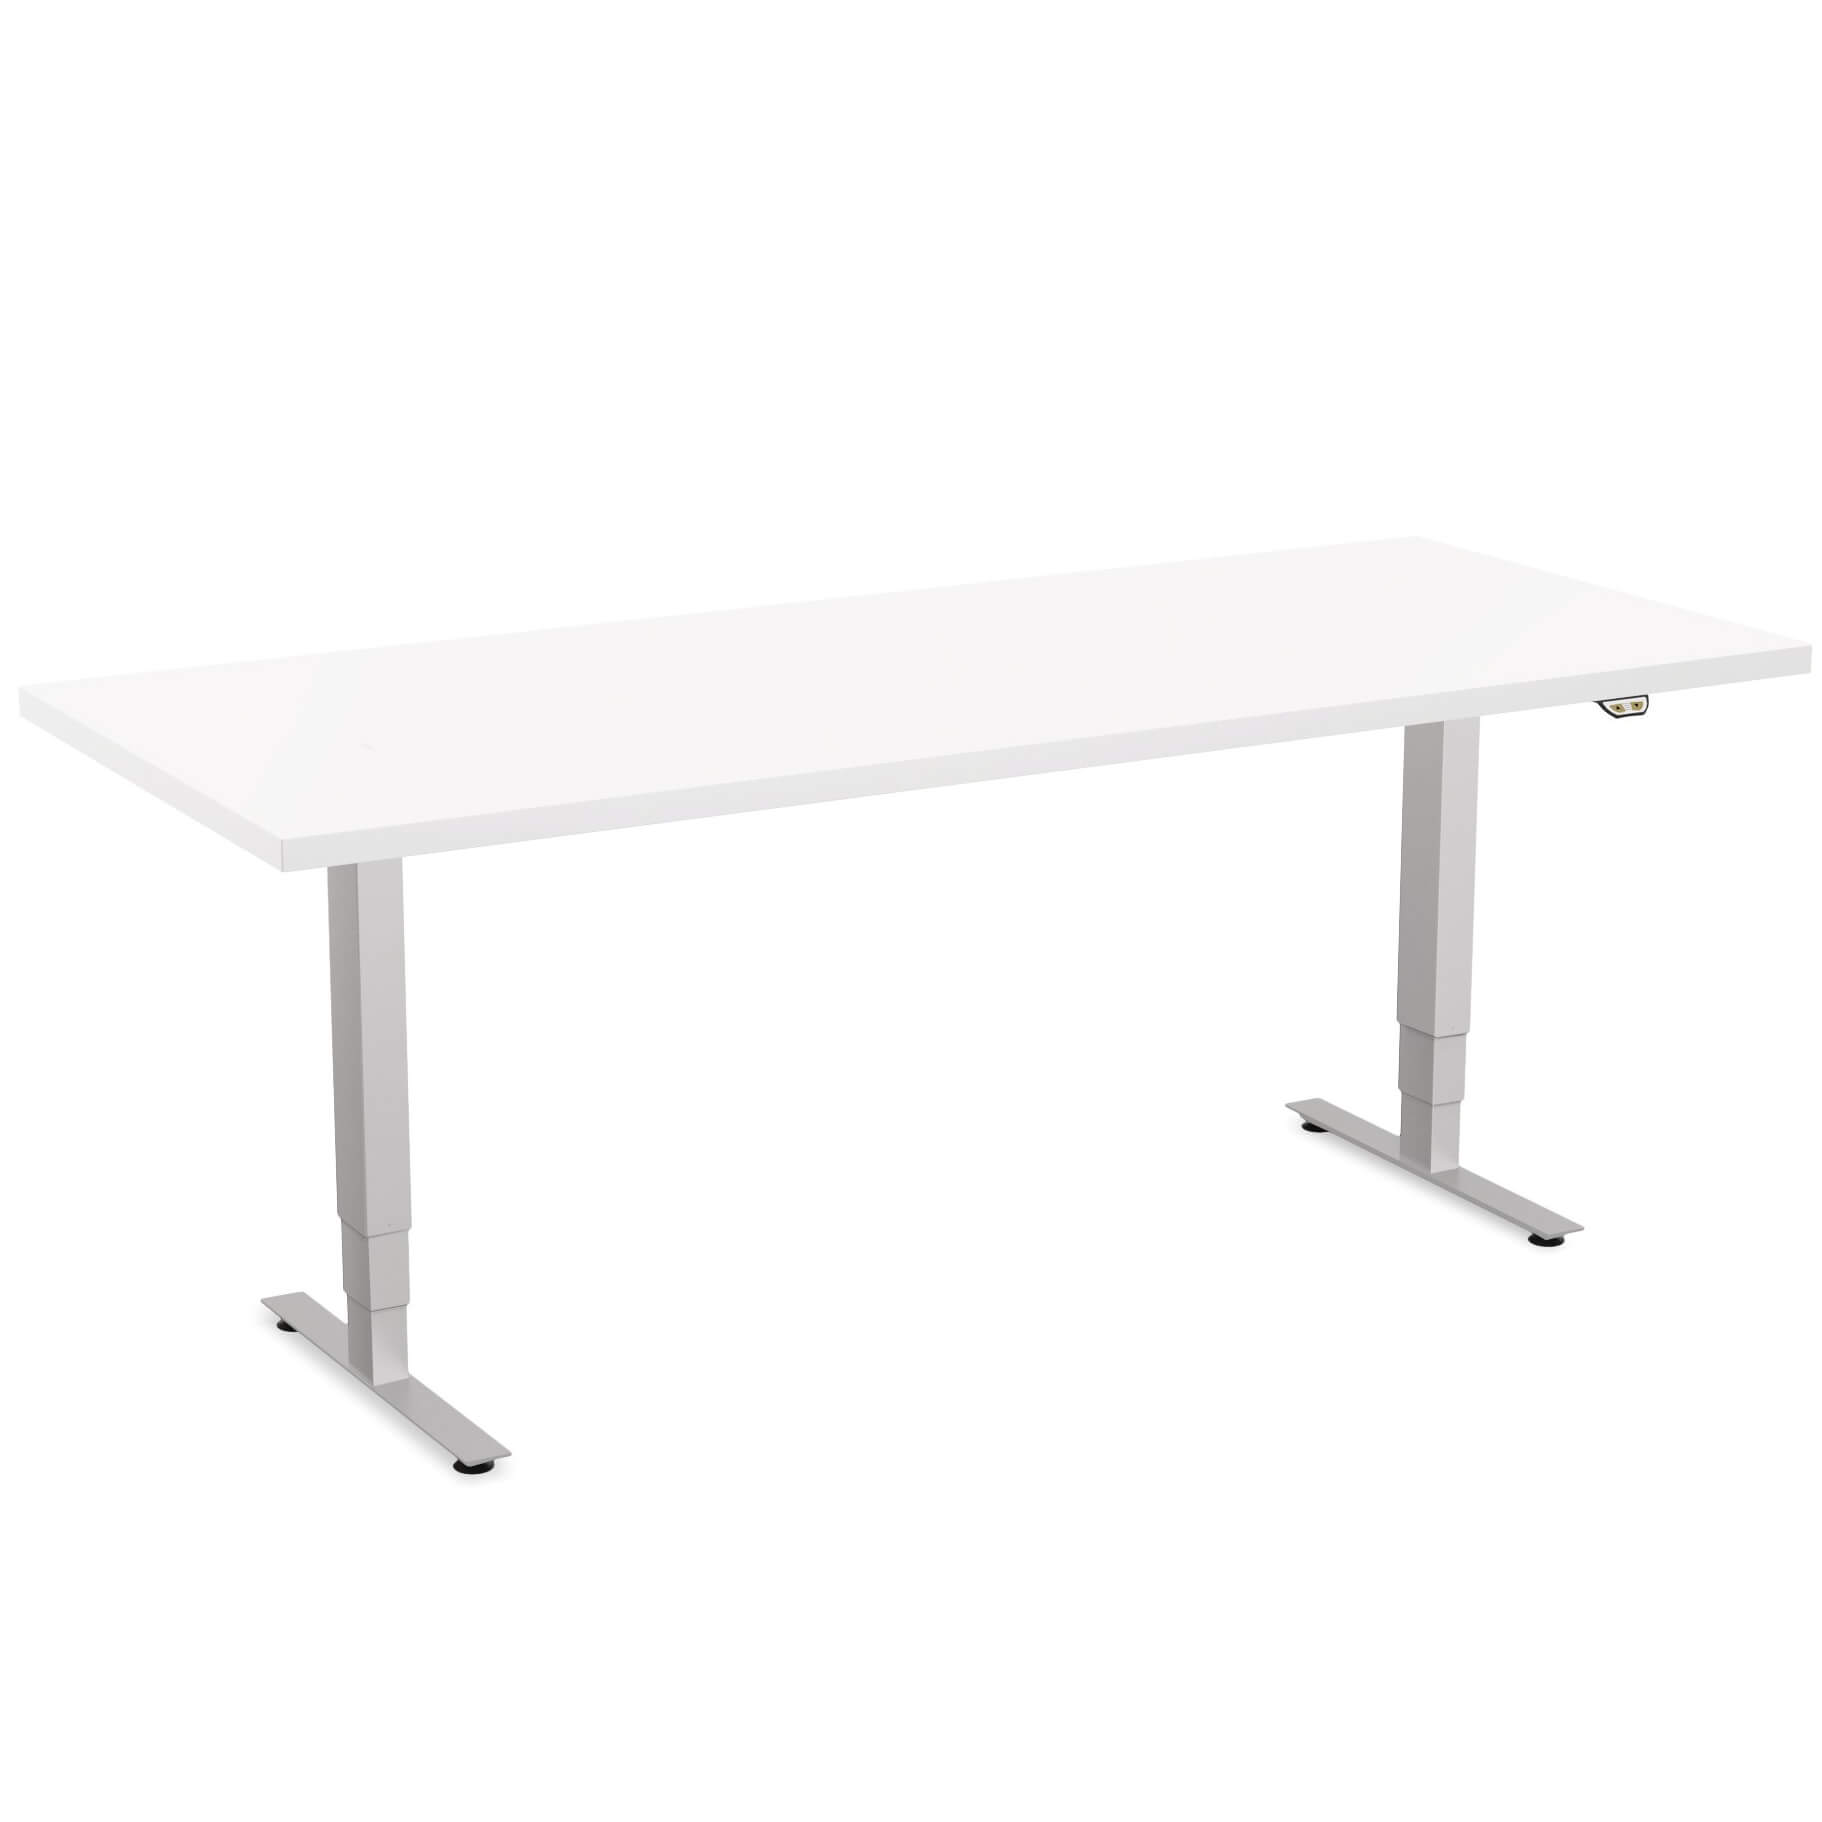 Sit stand desk height adjustable office table